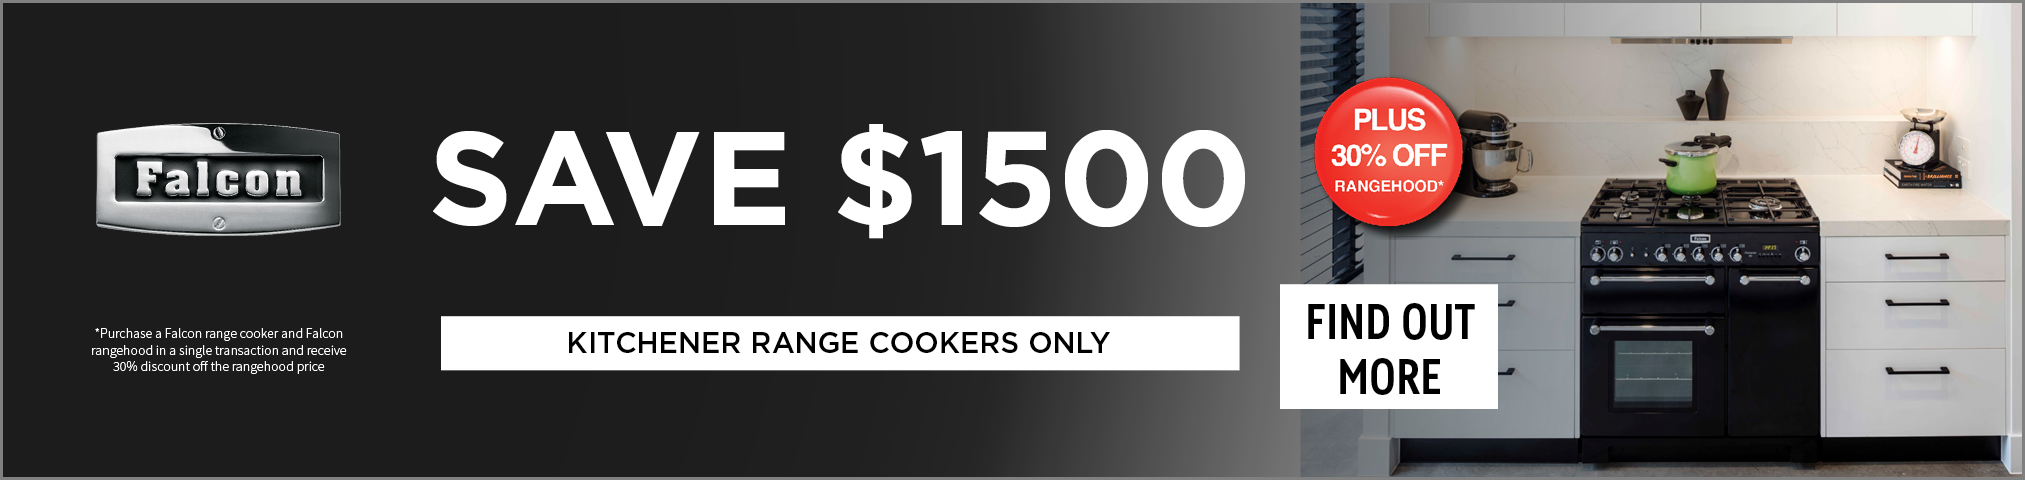 Save $1,500 On Falcon Kitchener Range Cookers*